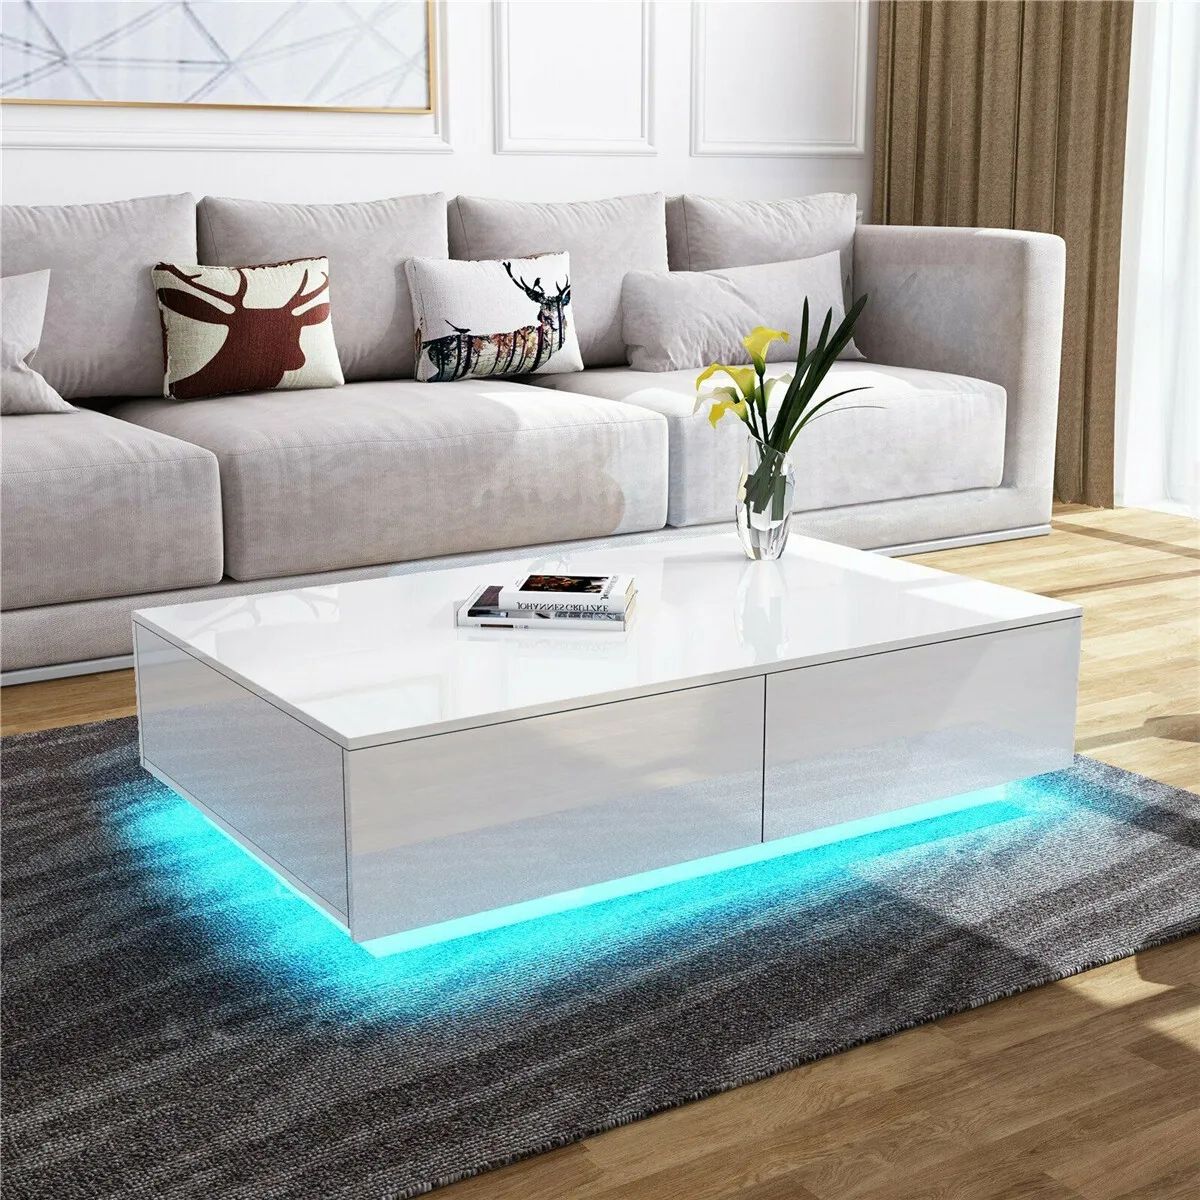 Led Light High Gloss Coffee Table With 4 Drawers Storage Living Room End  Table | Ebay For Led Coffee Tables With 4 Drawers (View 2 of 15)